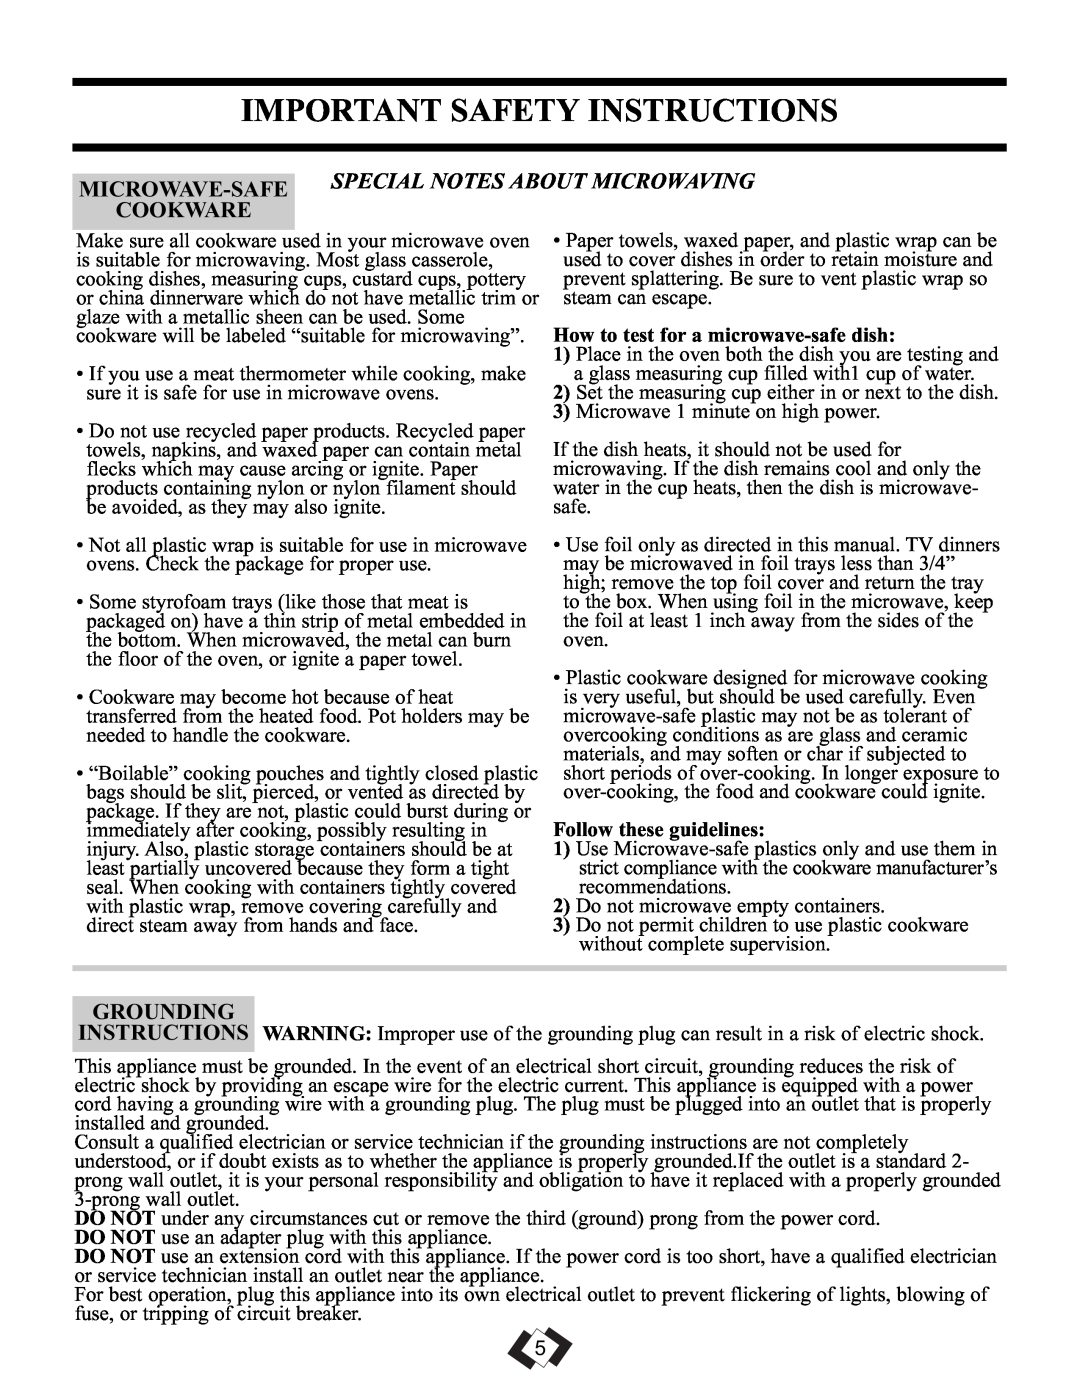 Danby DMW111KPSSDD Important Safety Instructions, Microwave-Safe Special Notes About Microwaving Cookware, Grounding 